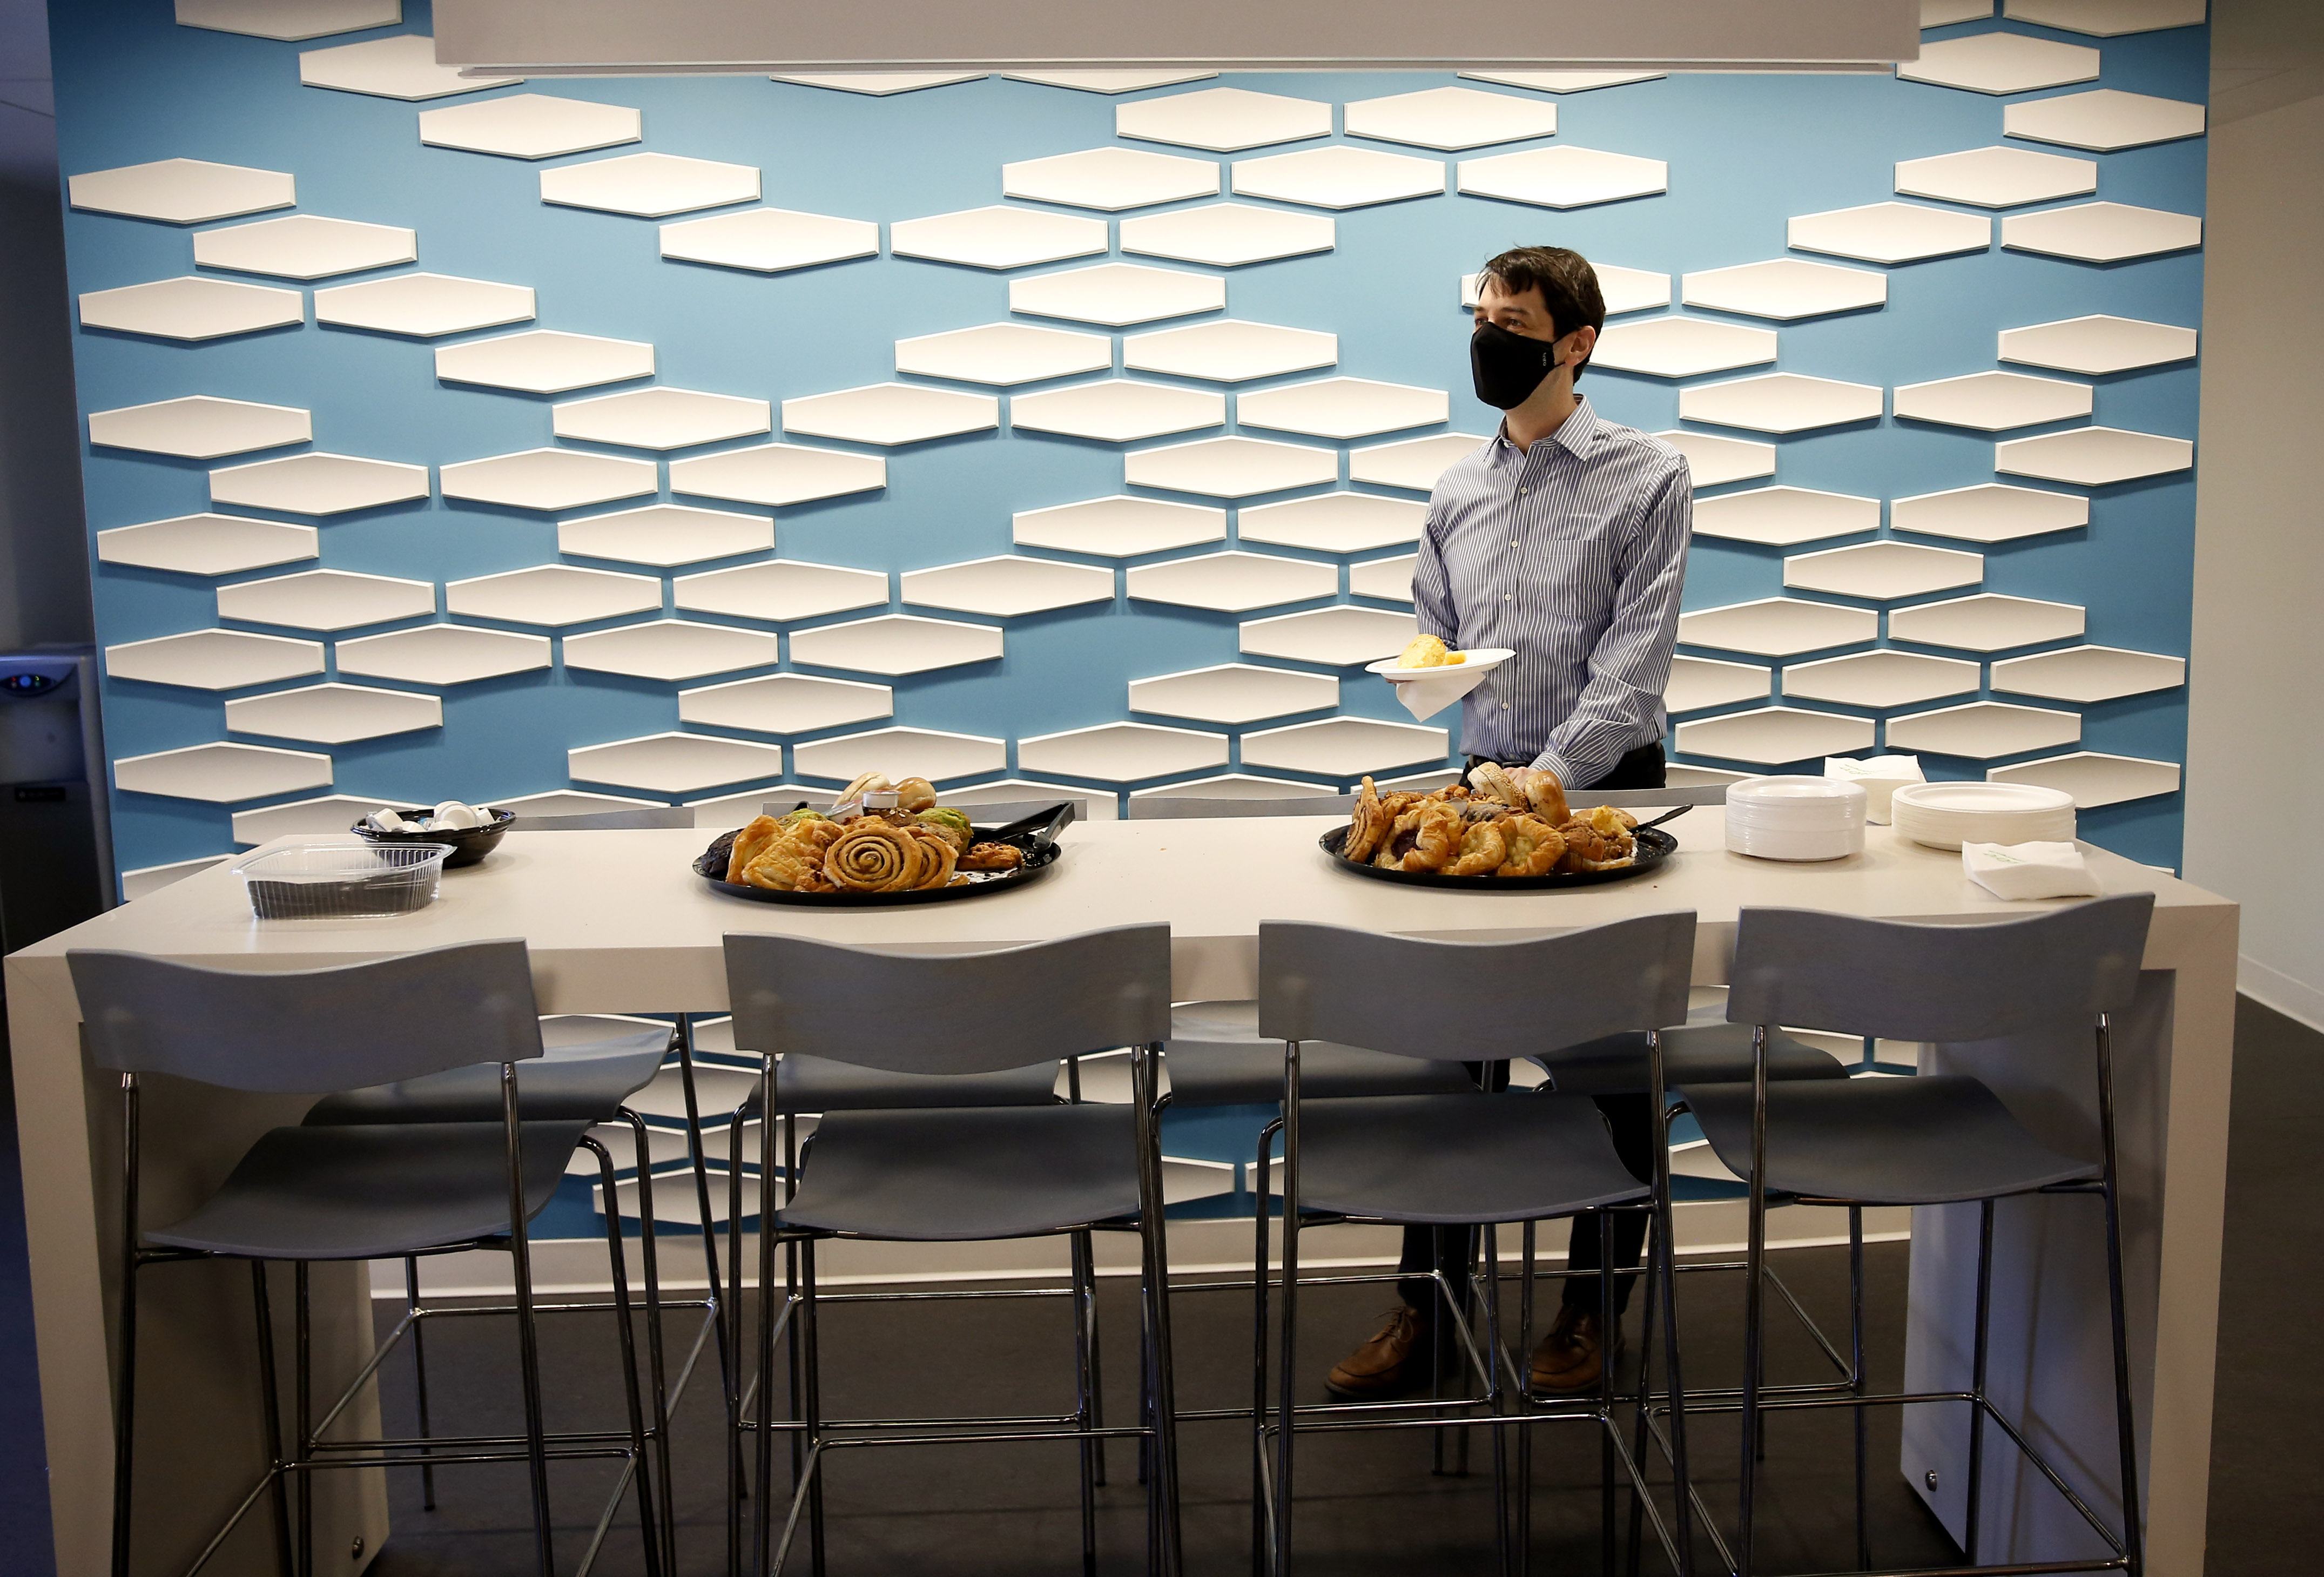 When there's food, 'more people show up': Return-to-office plans spark  catering boom - The Boston Globe